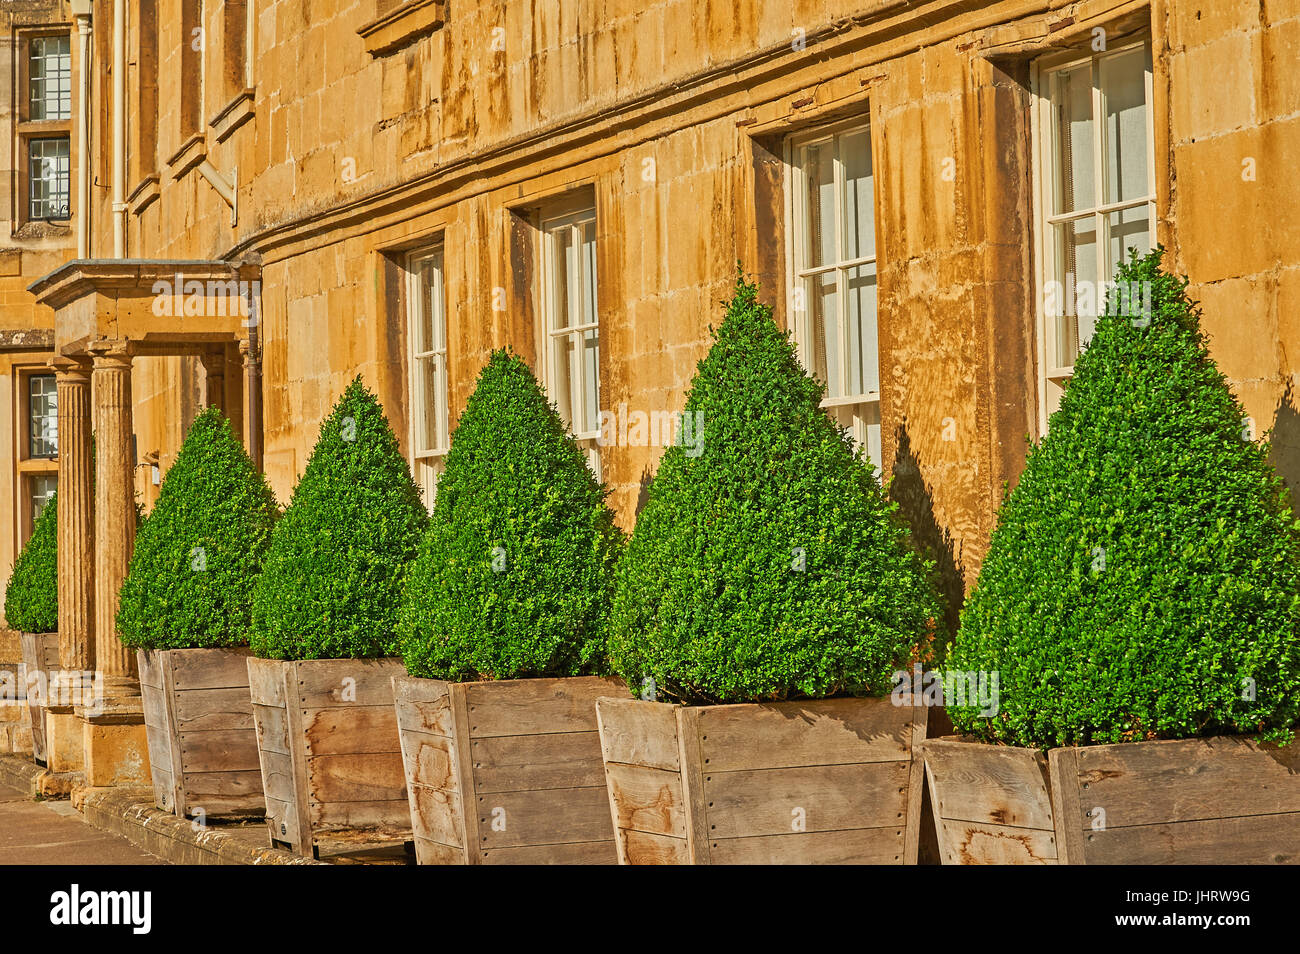 Repeating patterns of windows and conical shaped bushes. Stock Photo